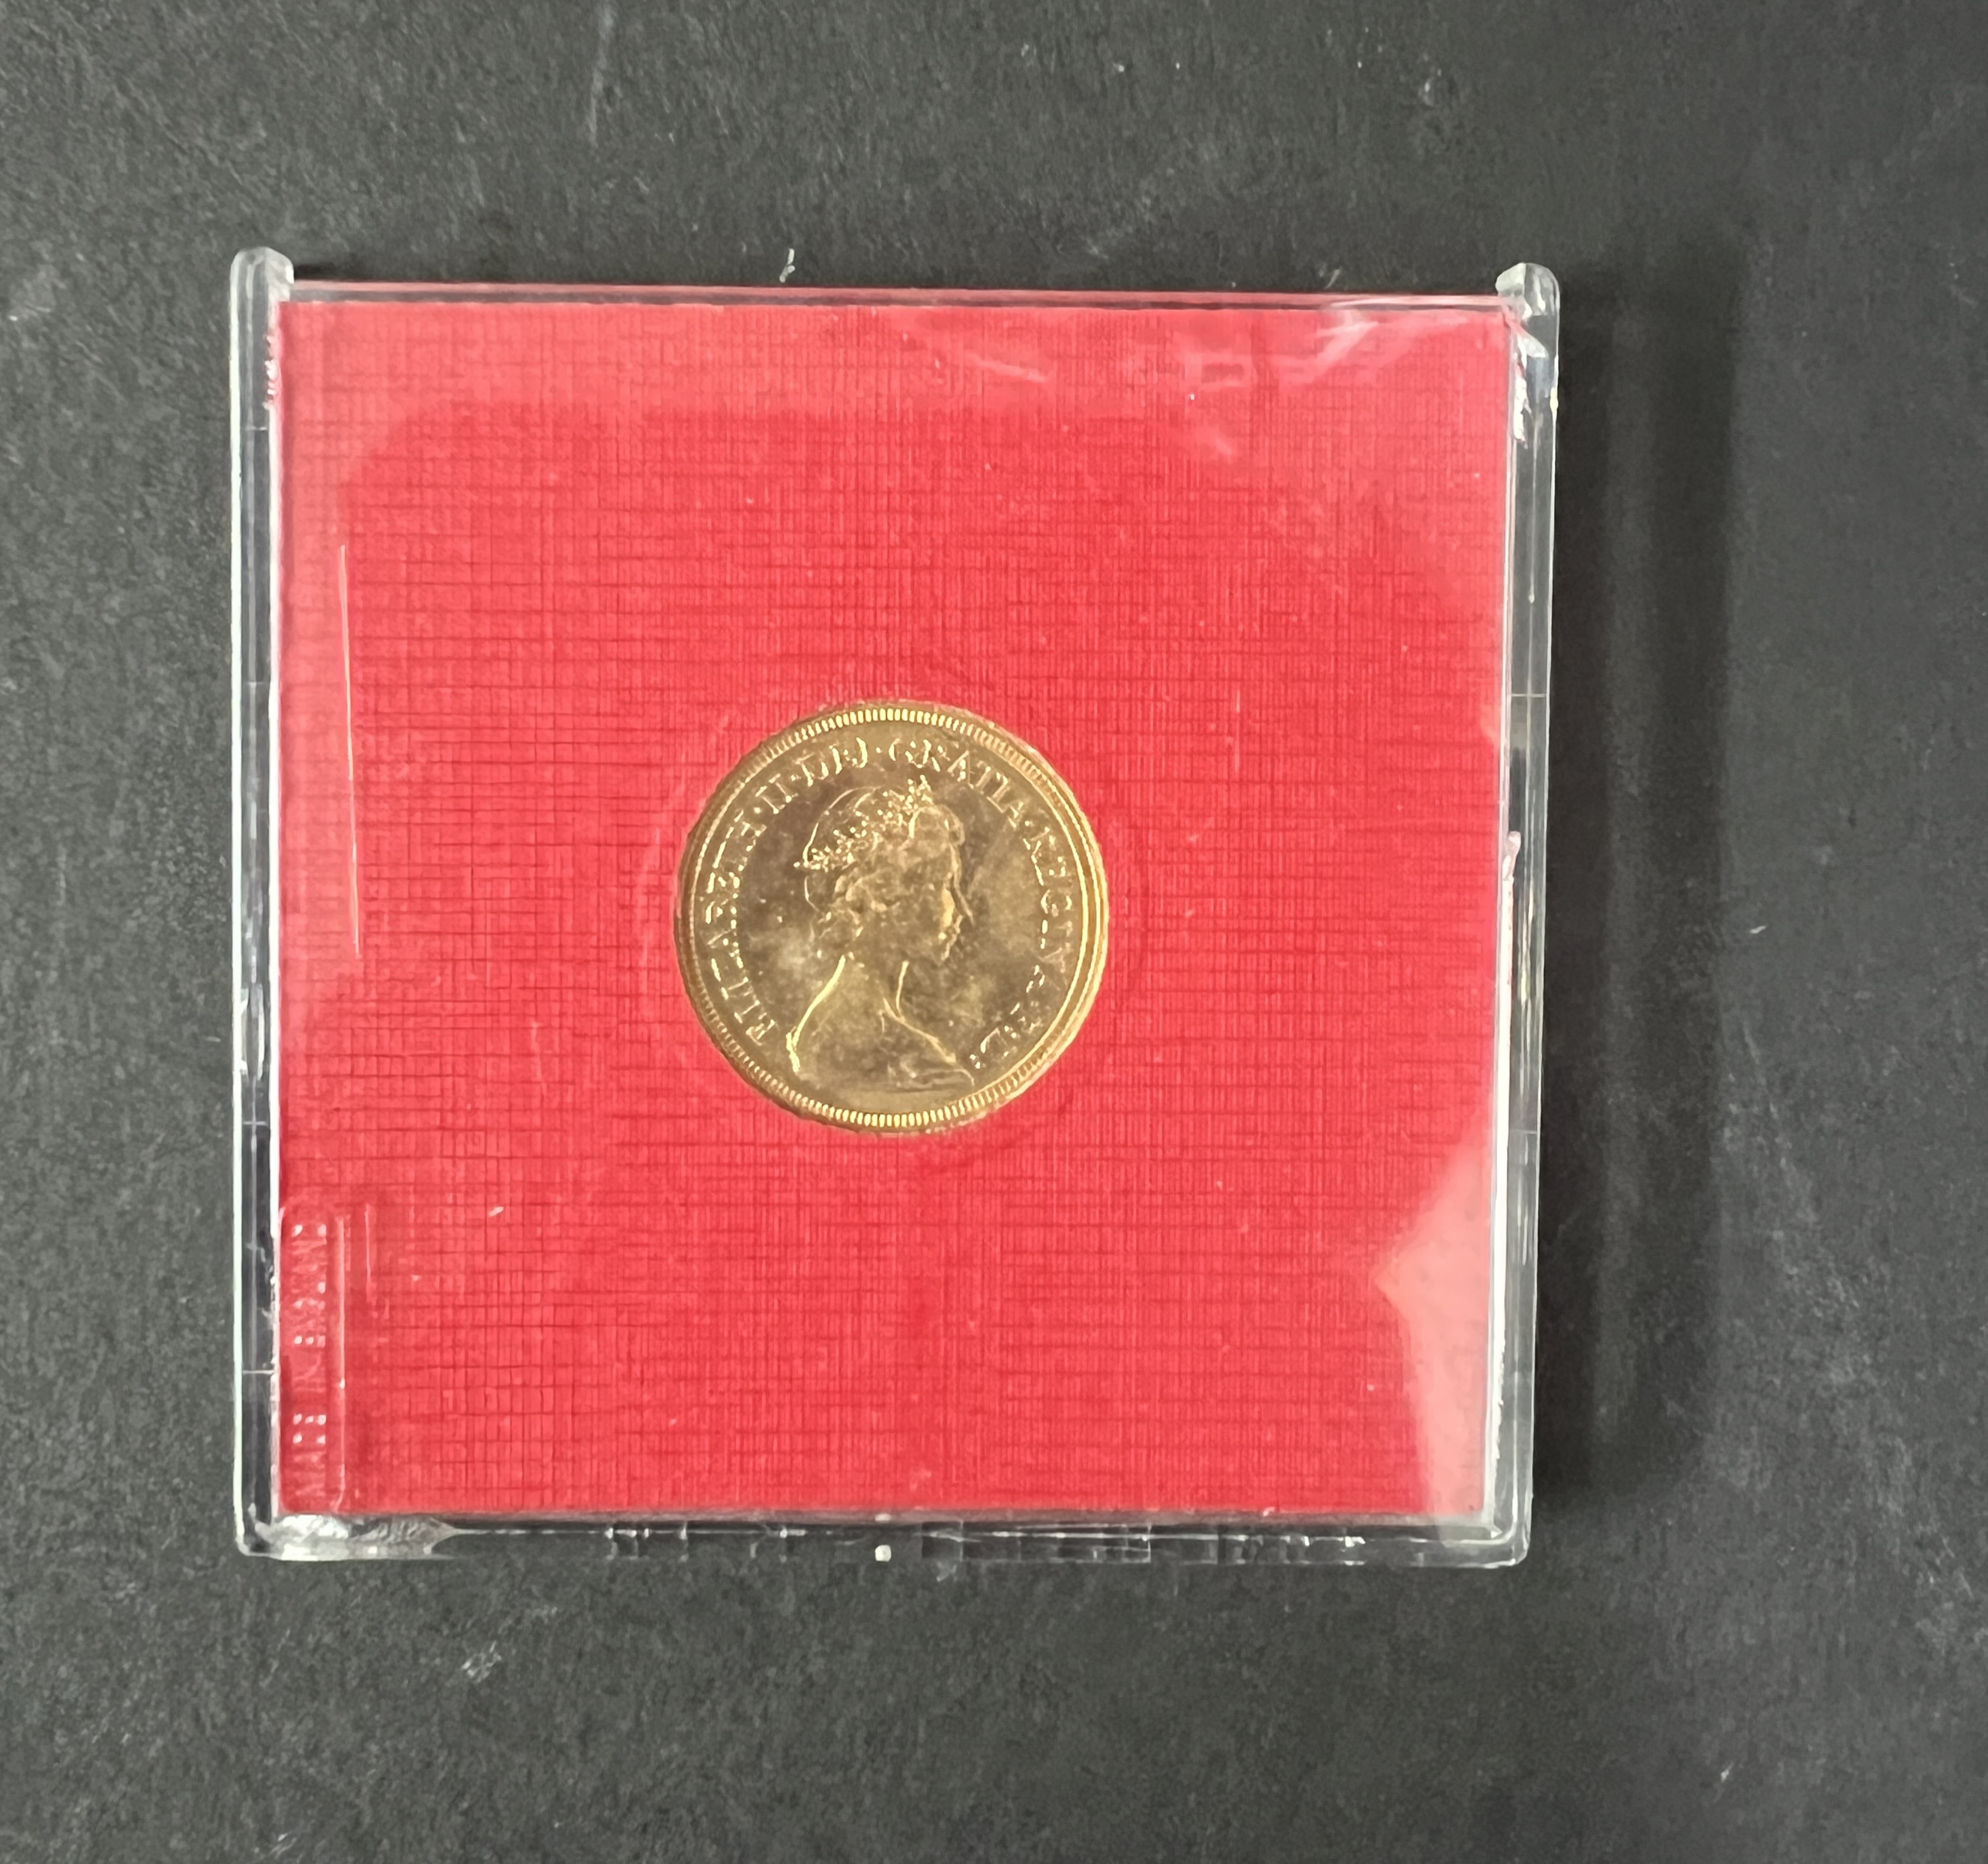 A Queen Elizabeth II 1981 full gold sovereign. - Image 2 of 2